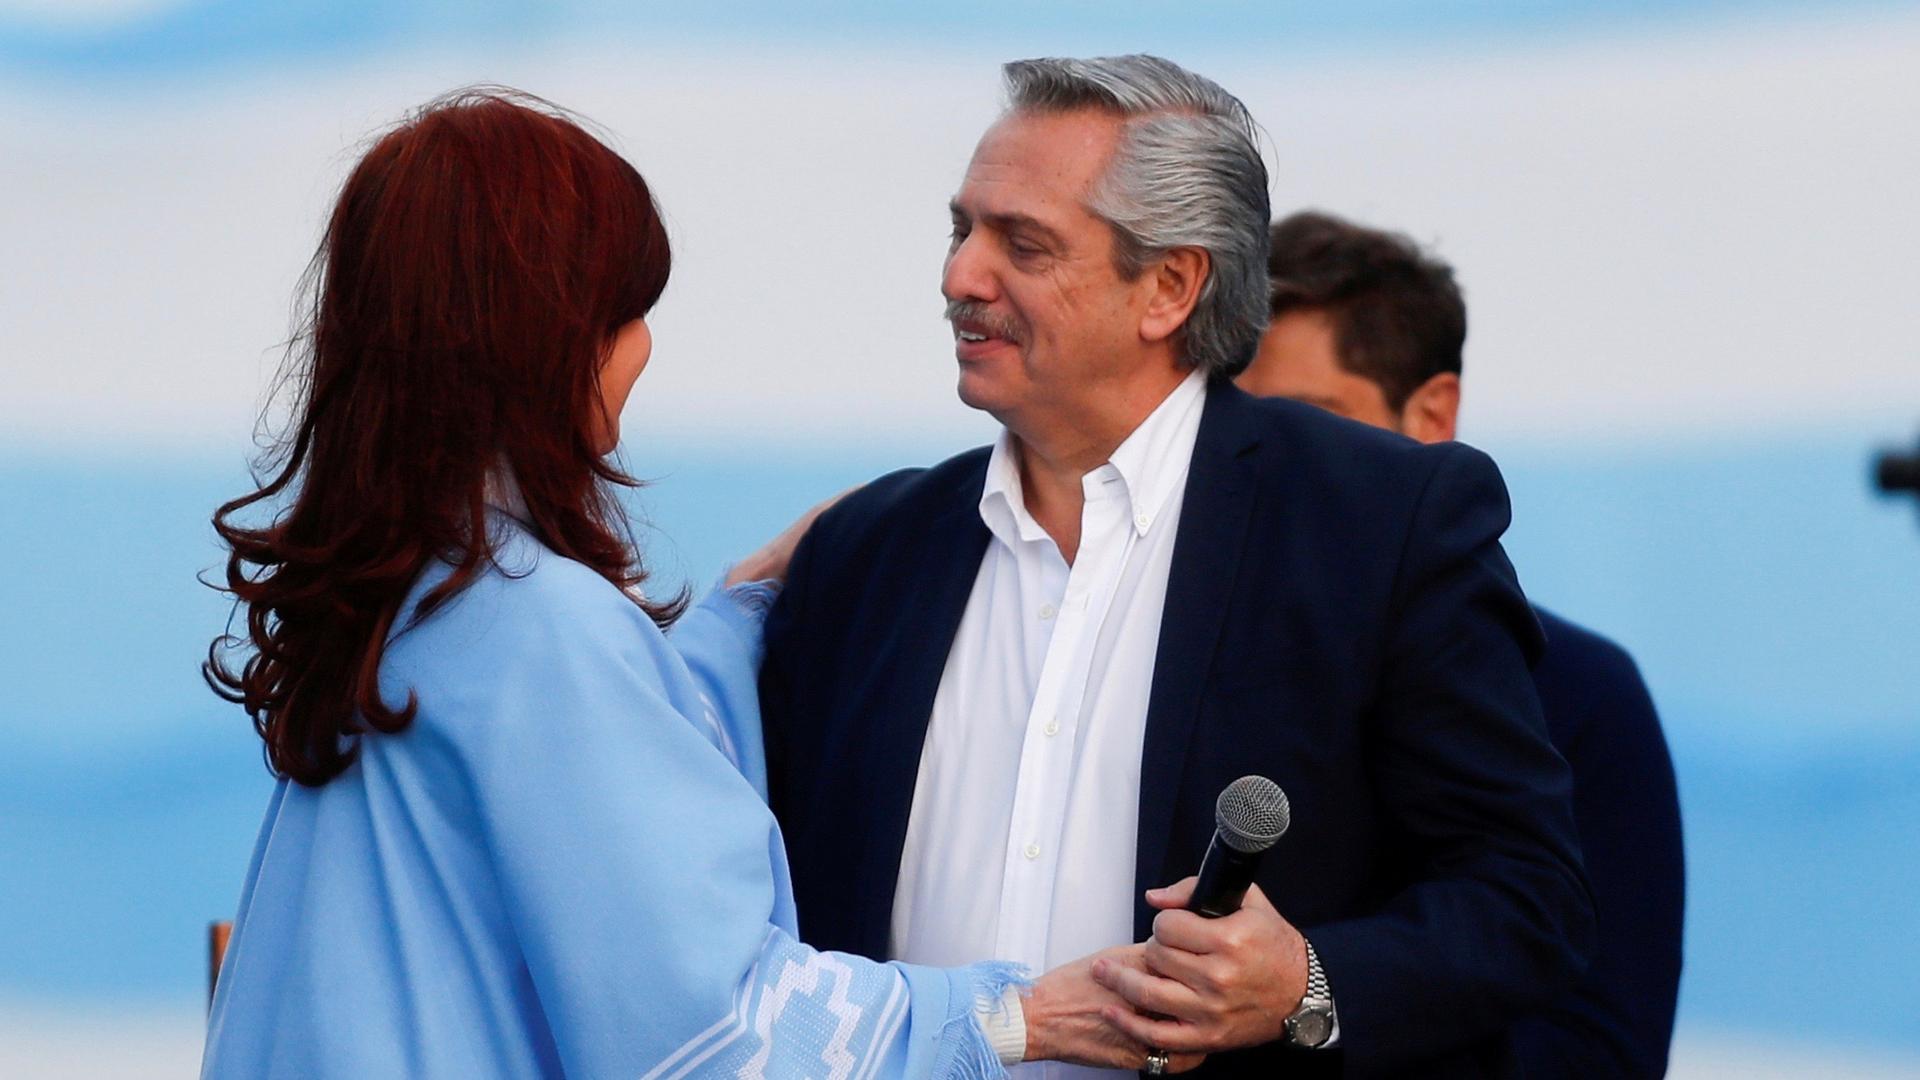 Argentina's presidential candidate Alberto Fernández and his running mate former President Cristina Kirchner embrace each other during a closing campaign rally in Mar del Plata, Argentina, Oct. 24, 2019. 